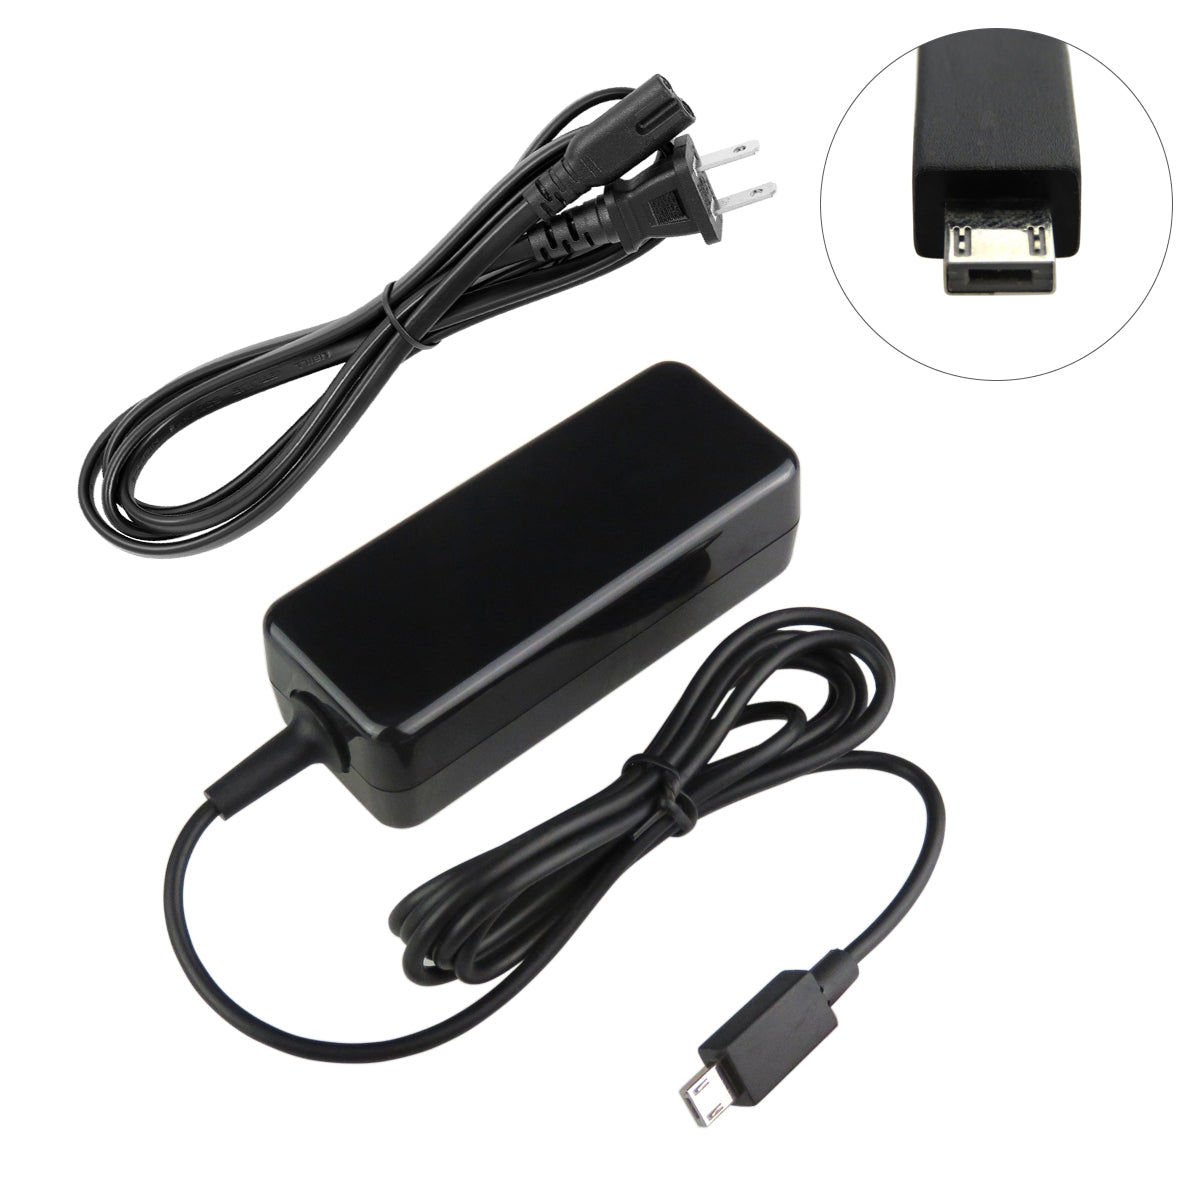 Charger for ASUS C201 Chromebook.